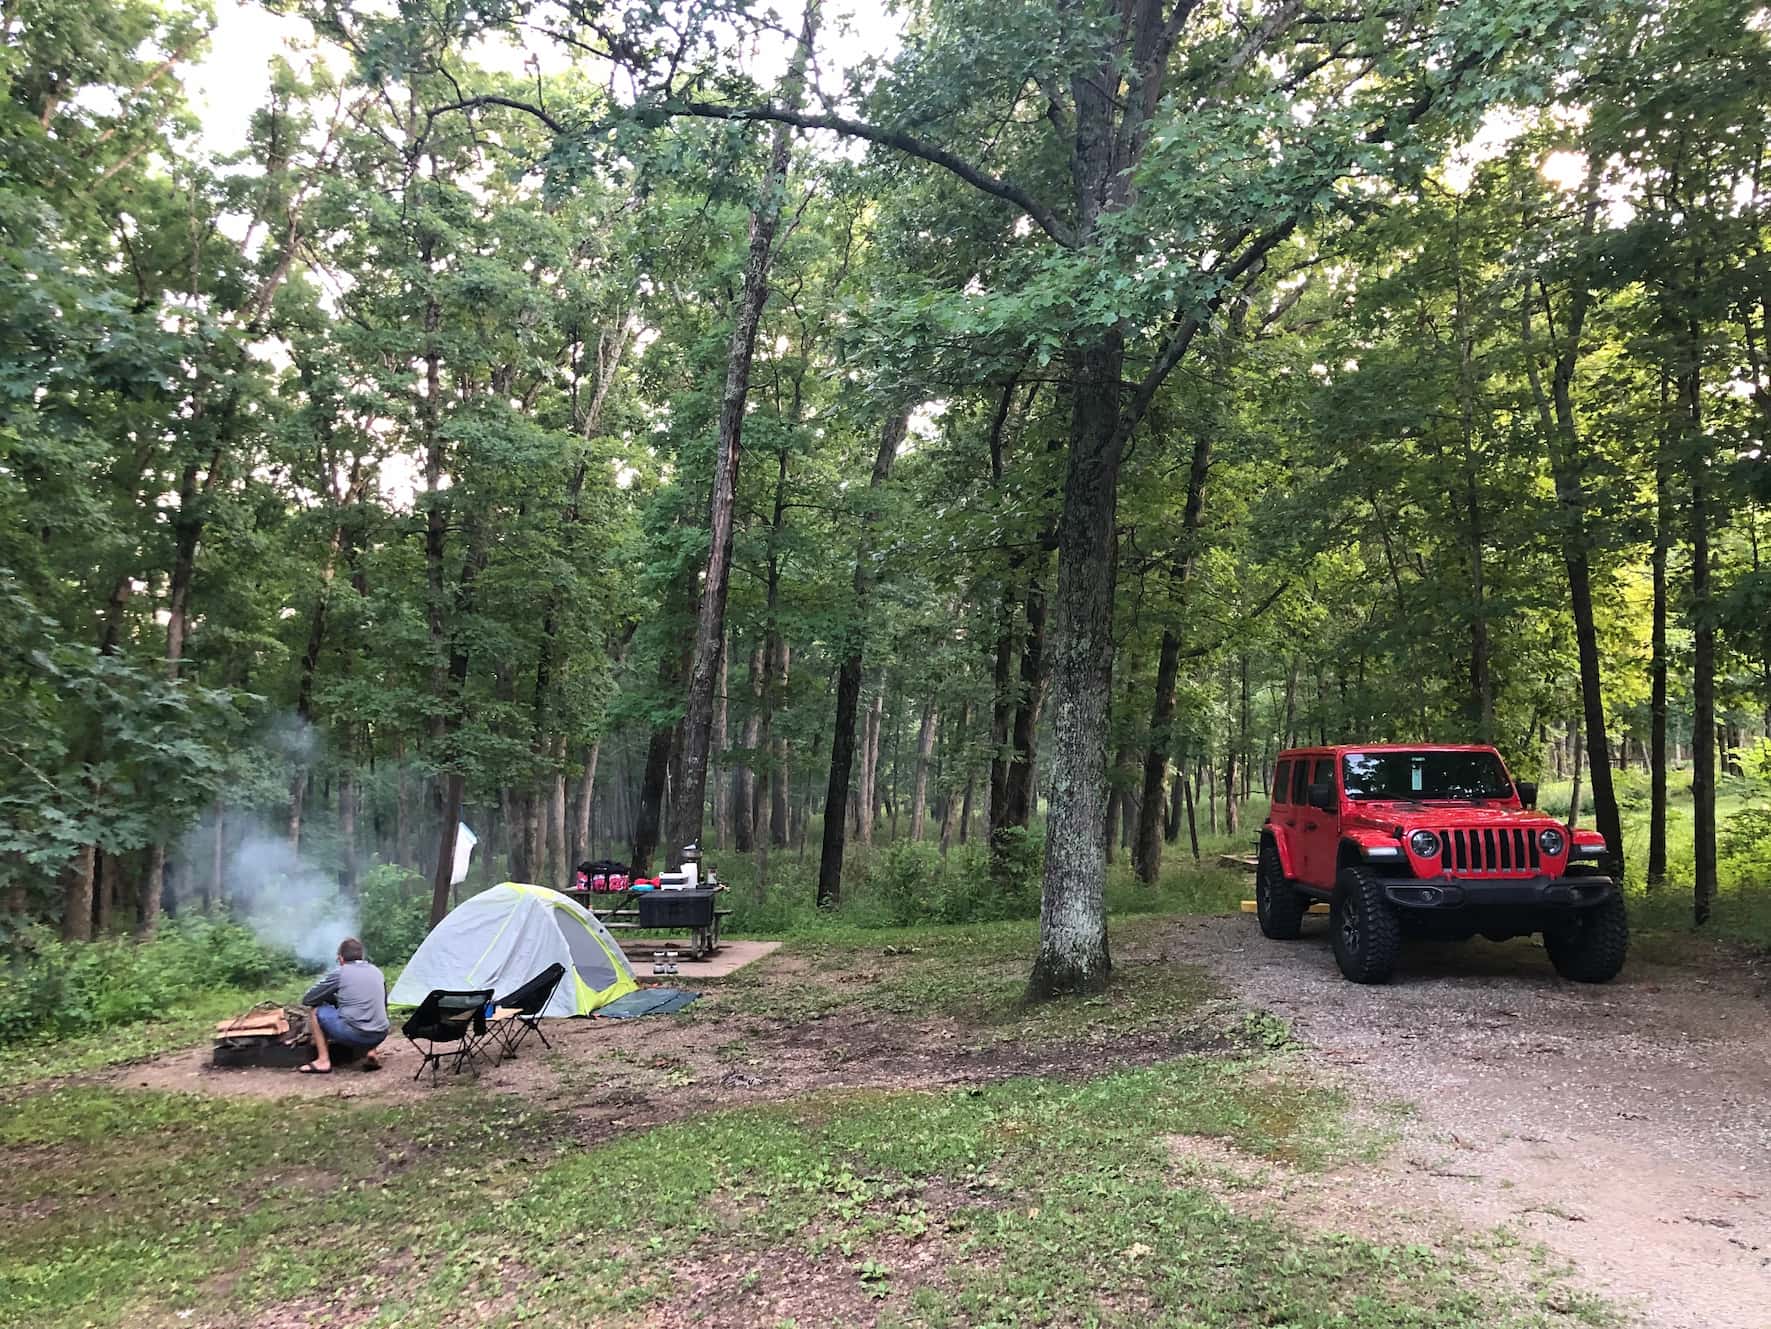 Jeep wrangler parked at campsite beside tent and campfire in the woods.